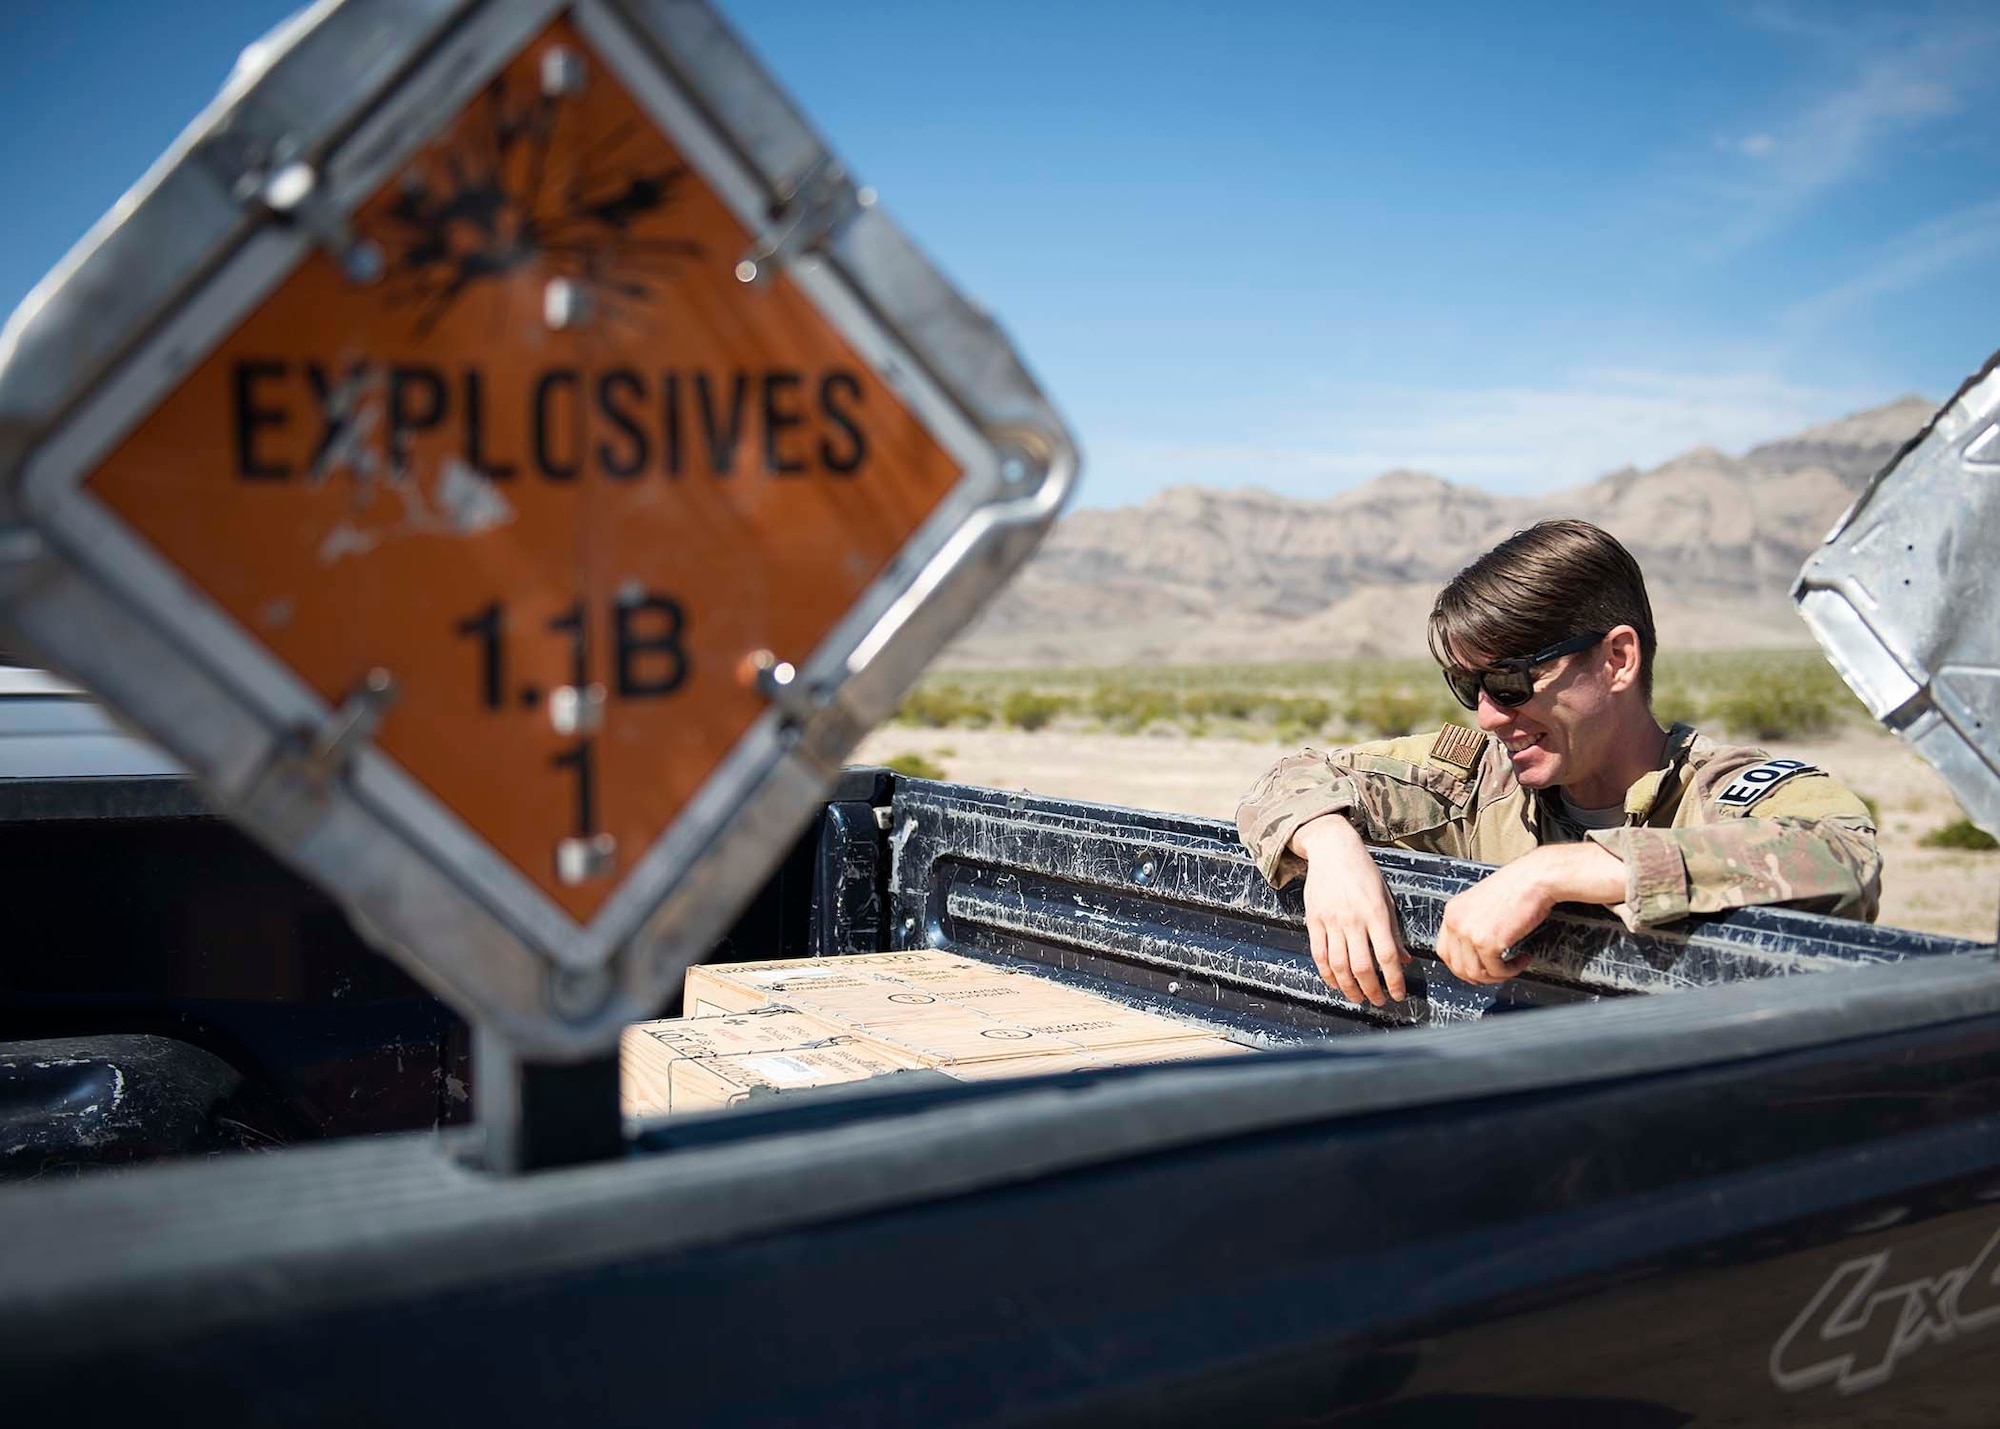 An explosive ordnance disposal technician leans over the back of a truck that contains explosive ordinance.